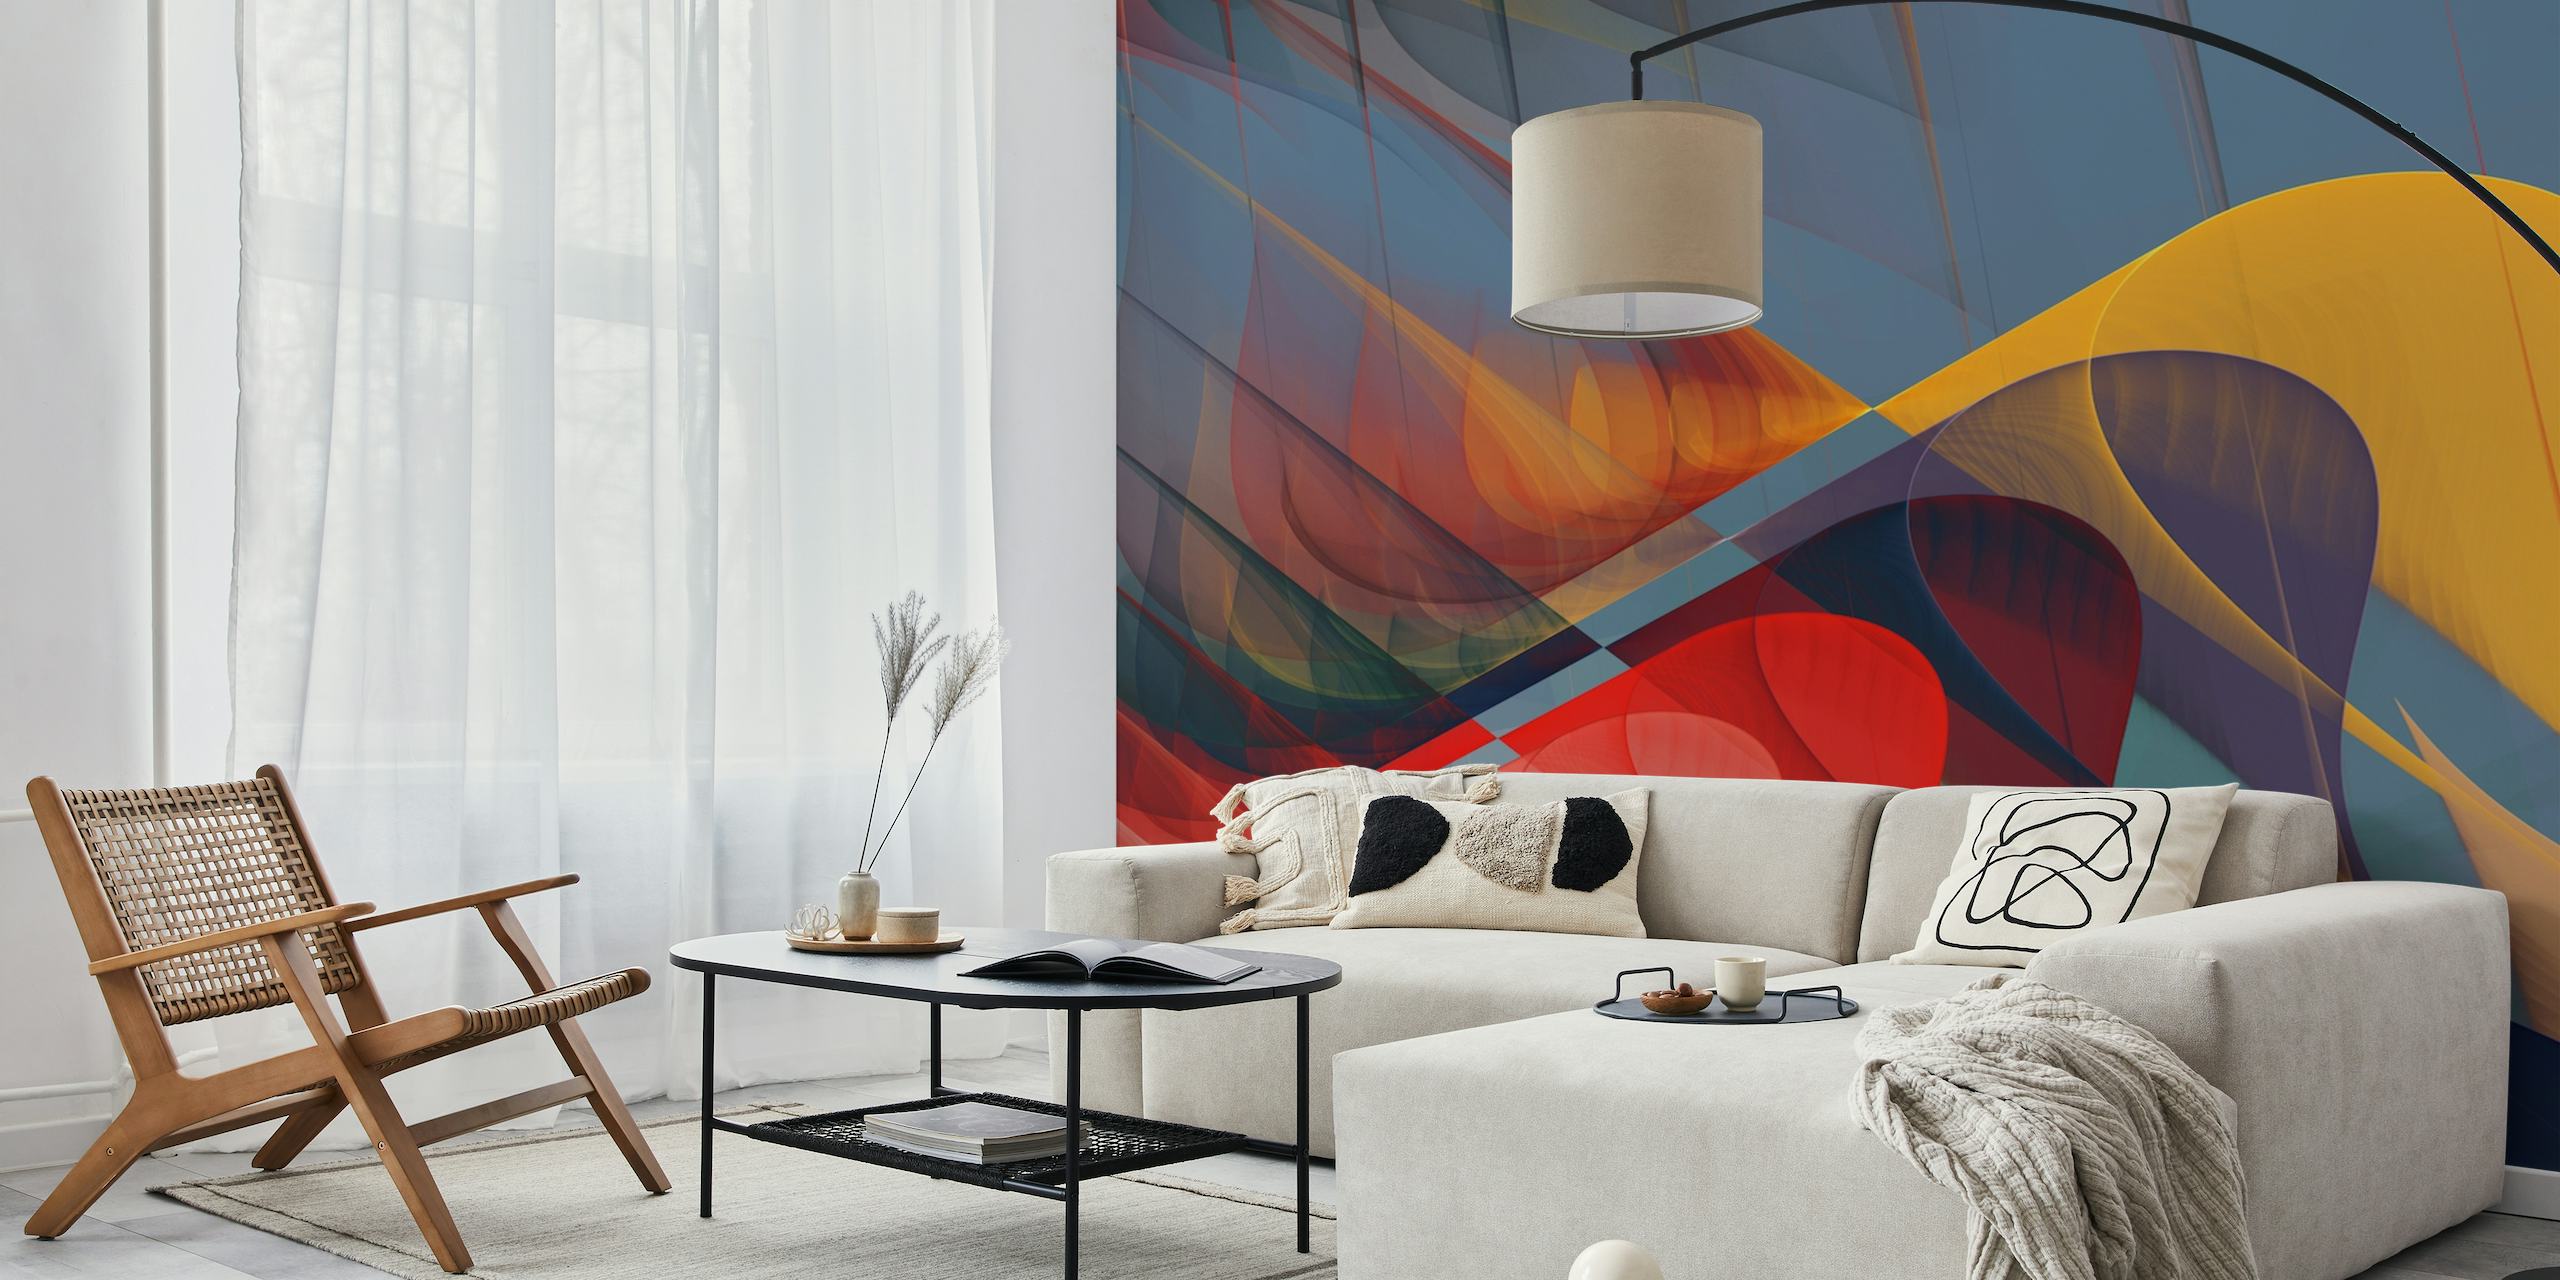 Abstract Vibrational Elevation wall mural with colorful overlapping shapes